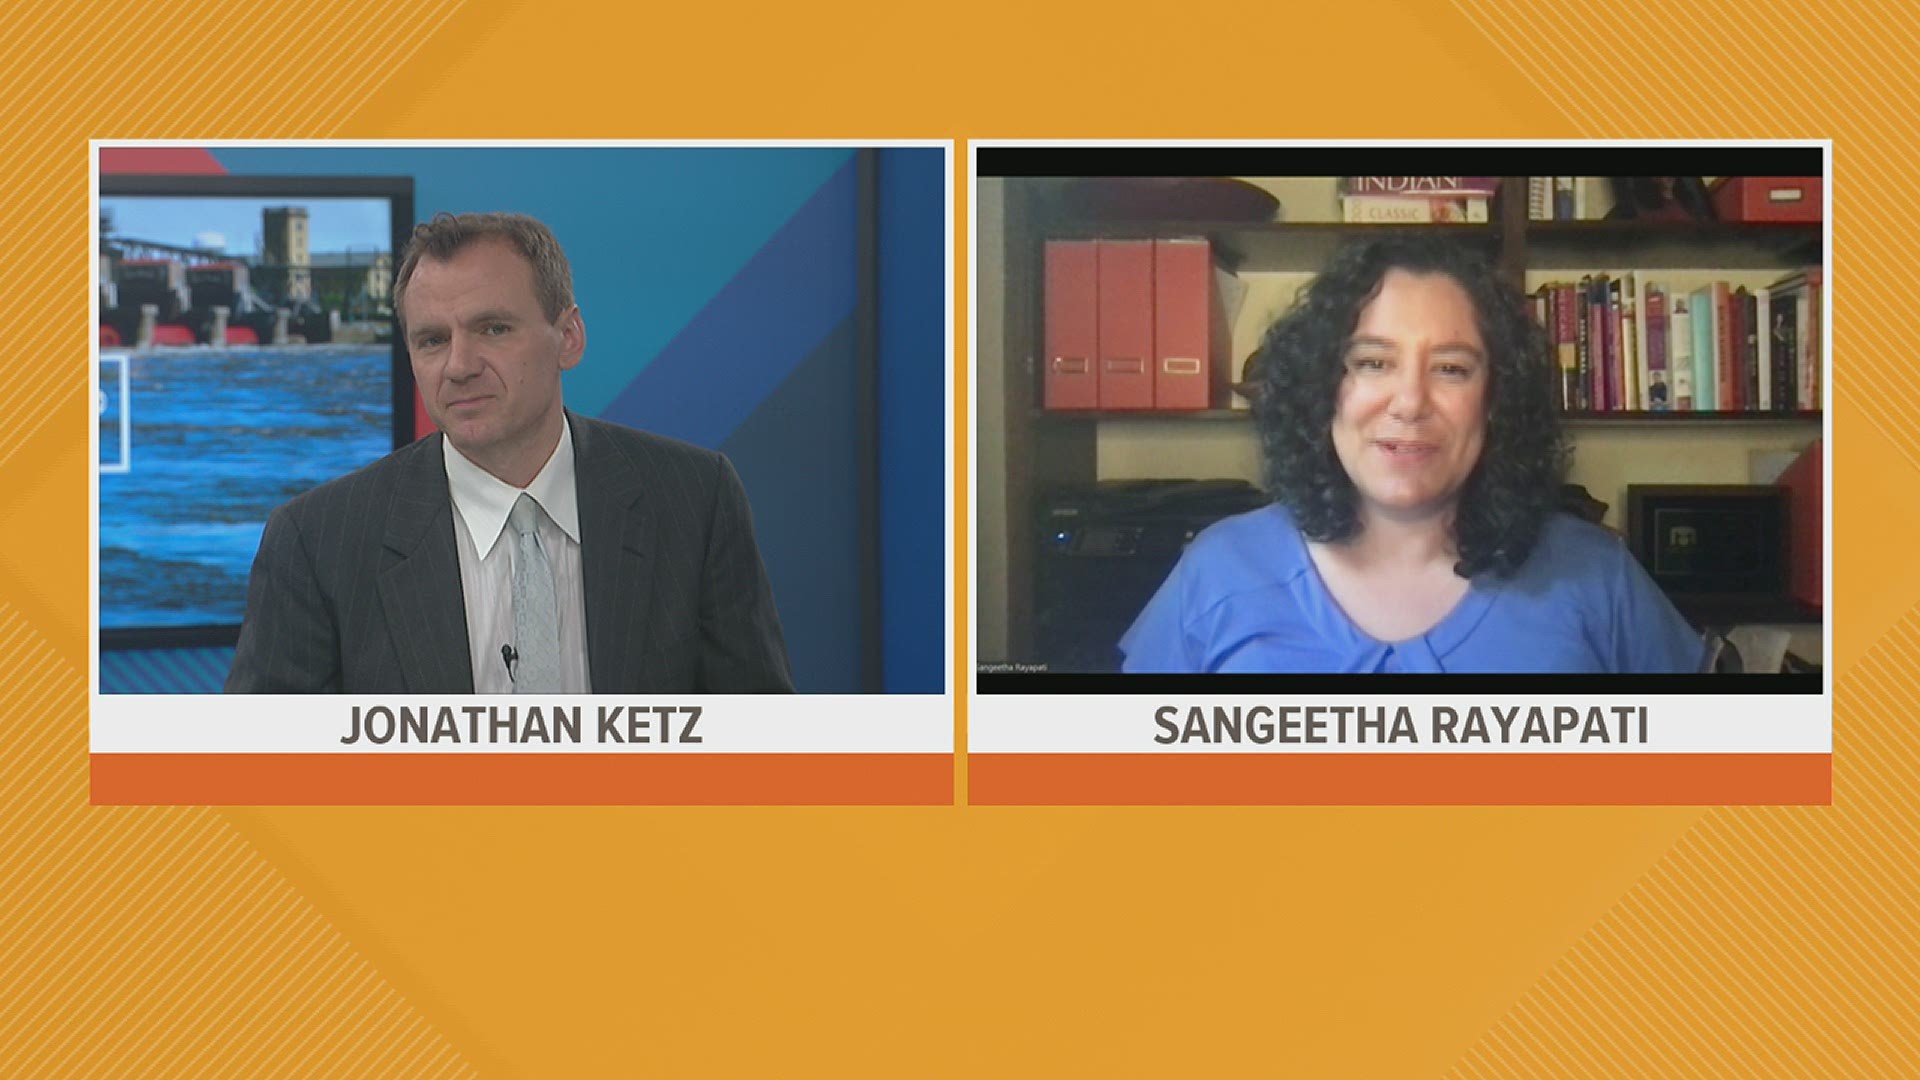 Sangeetha Rayapati joined us live during the 11 a.m. hour Thursday, June 17th to discuss a number of issues happening in her city.